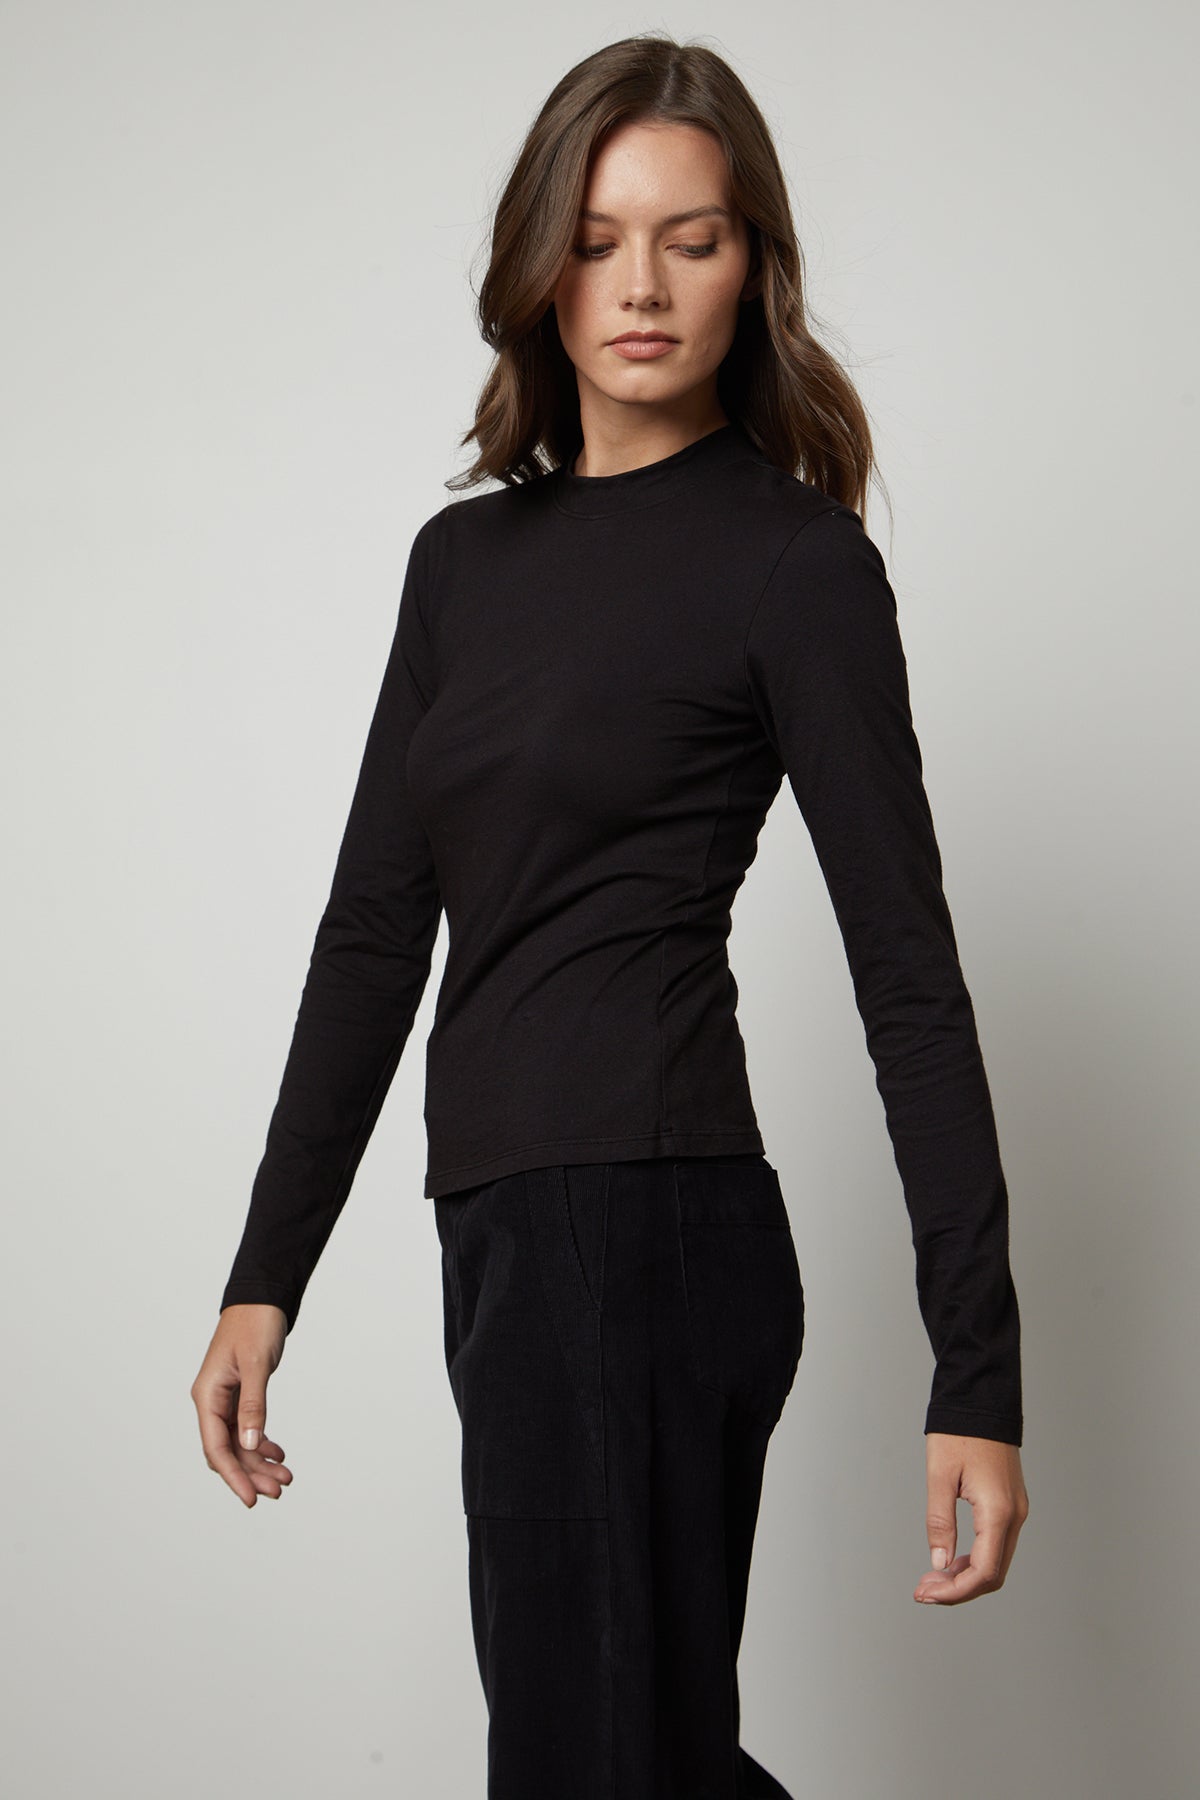   The model is wearing a LINNY MOCK NECK TEE by Velvet by Graham & Spencer. 